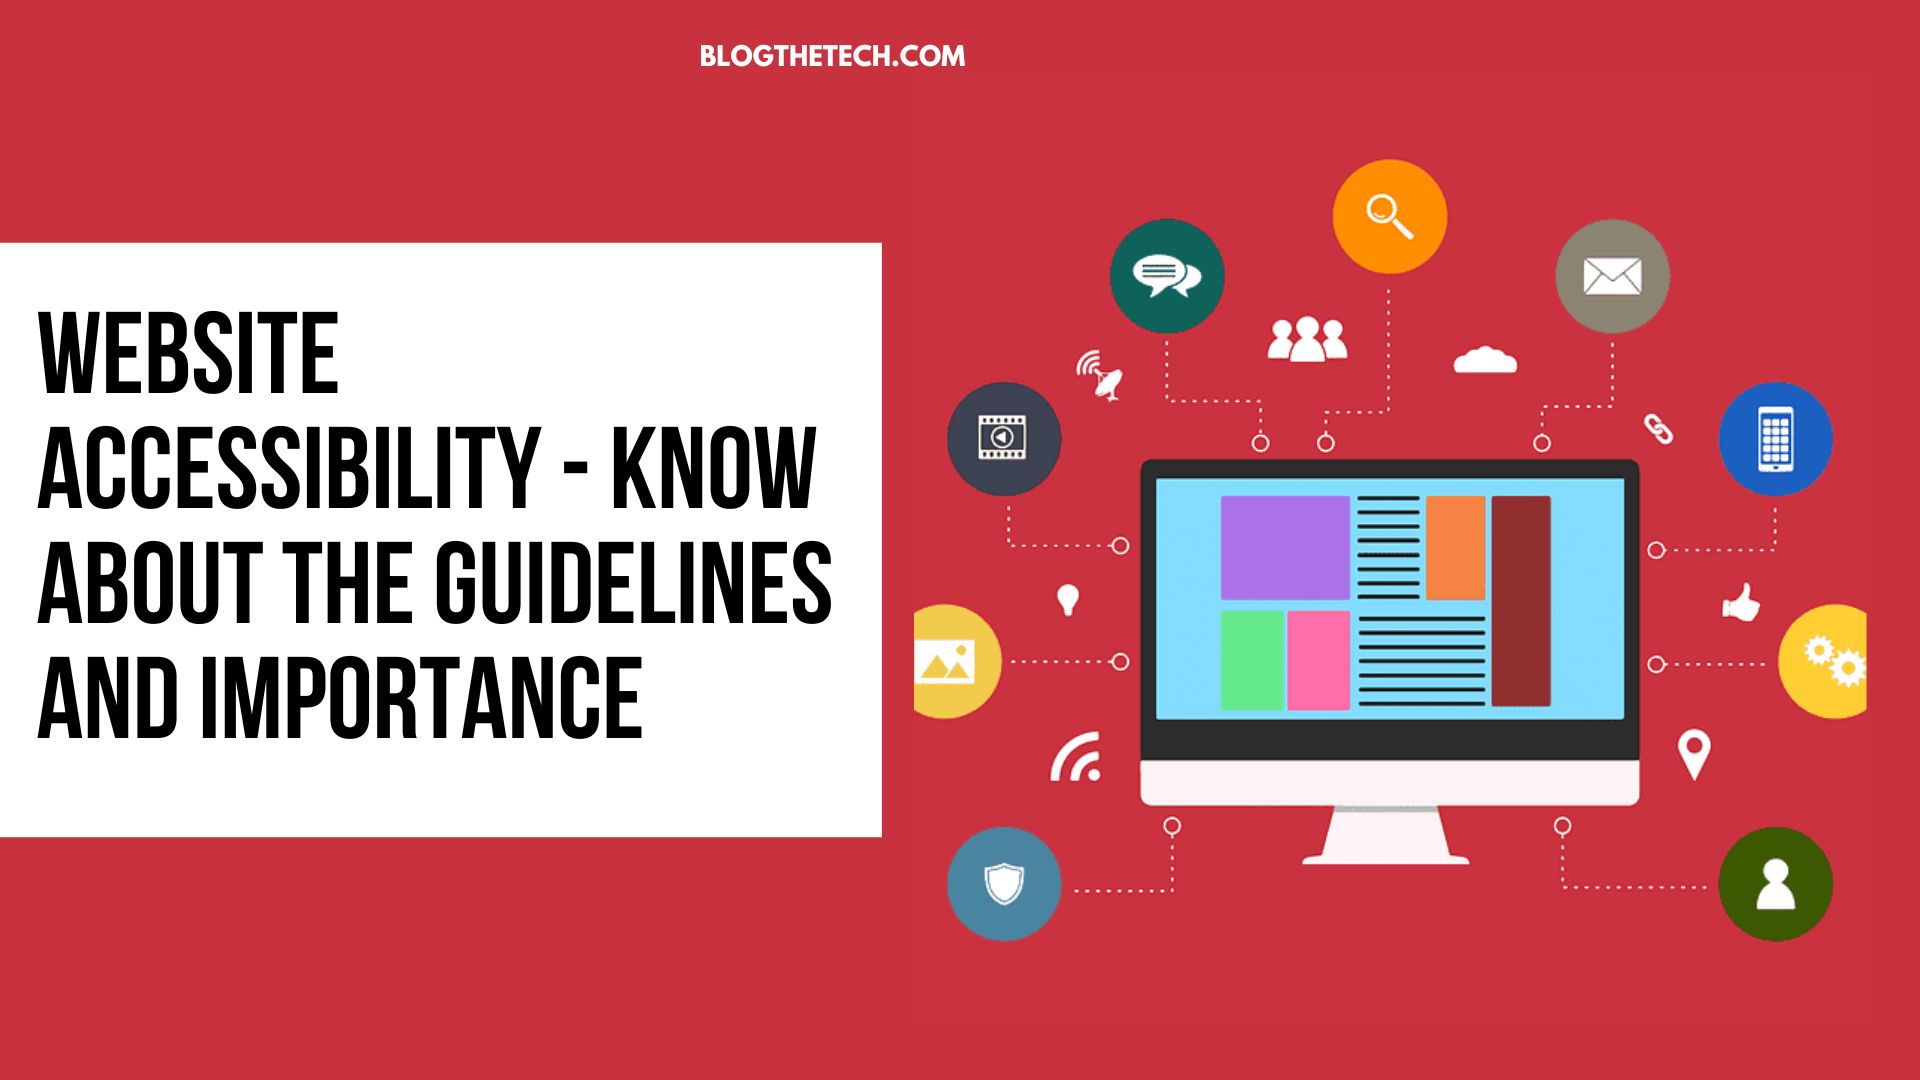 website-accessibility-guidelines-and-importance-featured